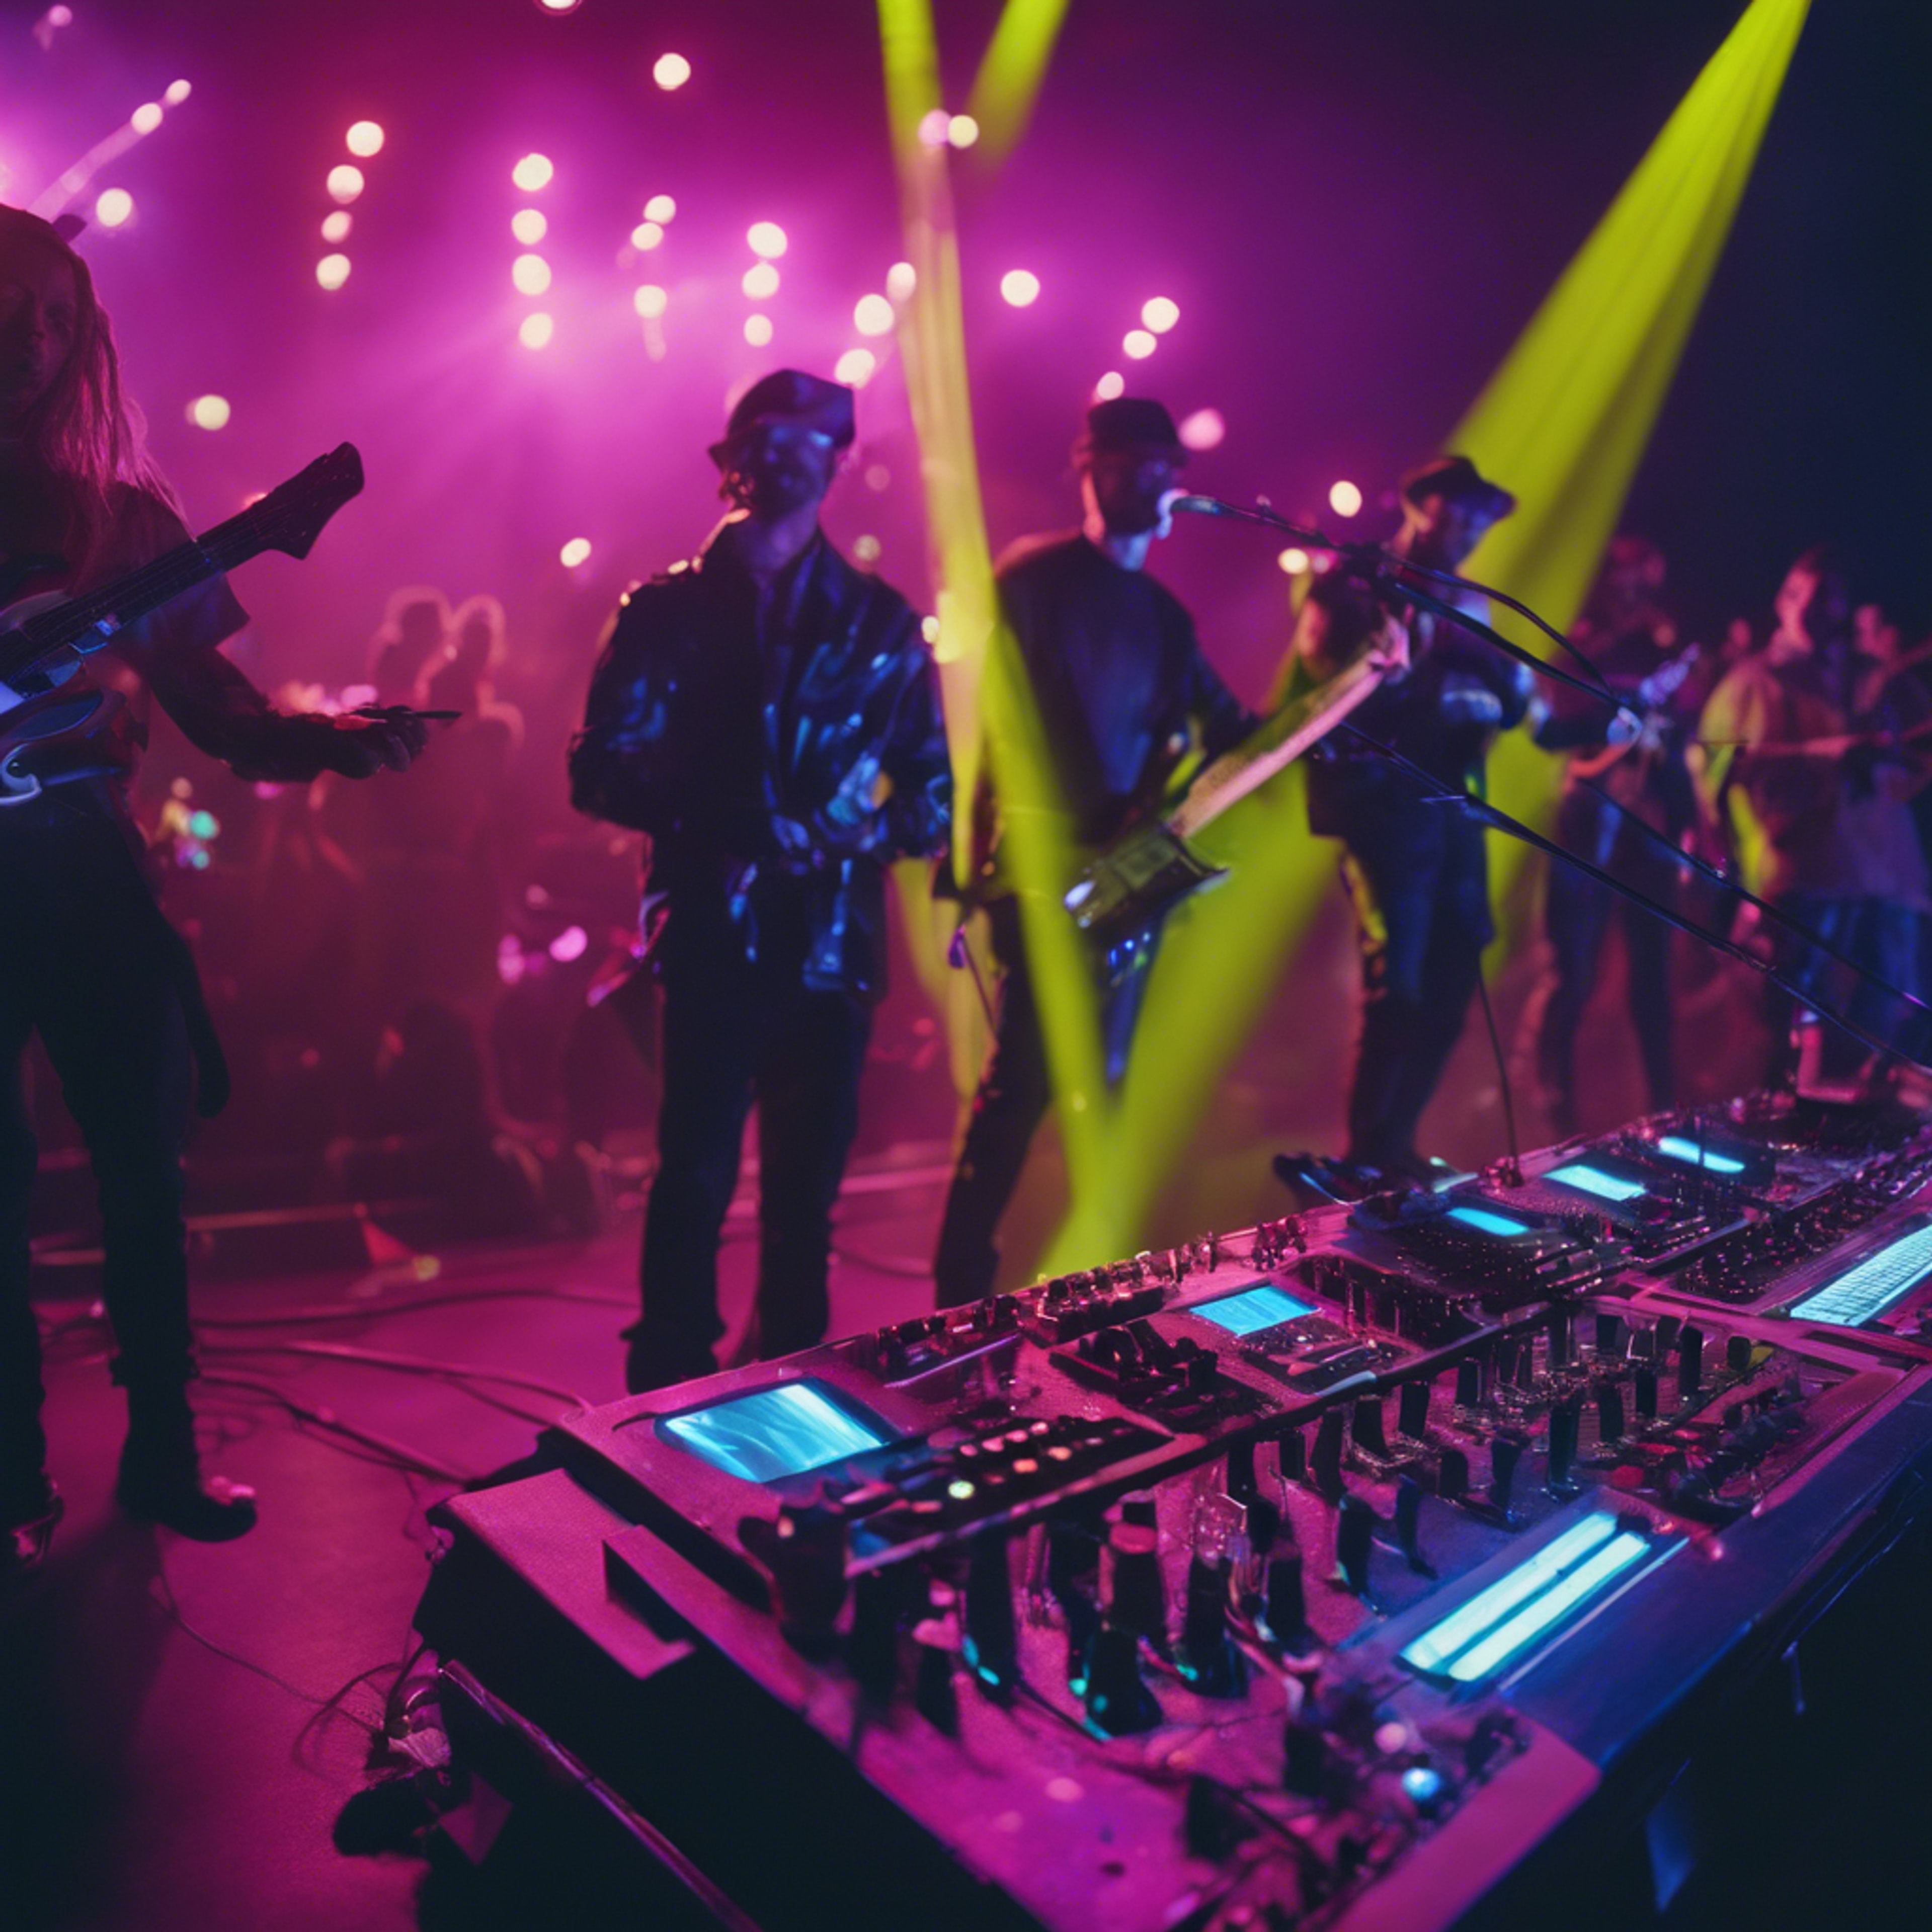 A futuristic Y2K music concert with an electro band playing on a stage with neon strobes. Fondo de pantalla[504571a7c1624adb8d57]